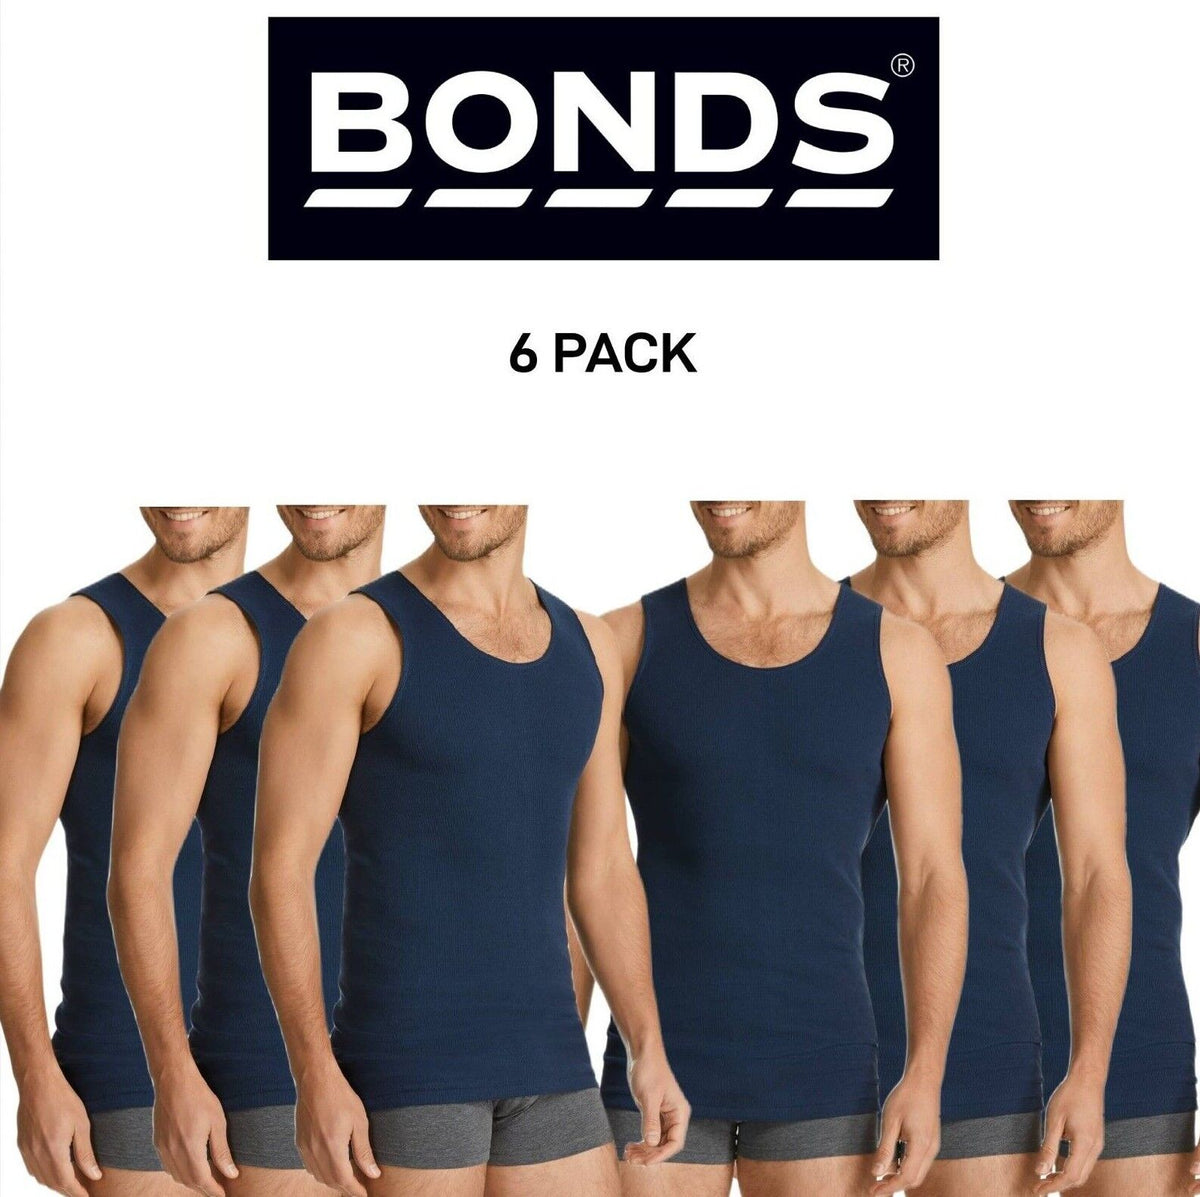 Bonds Mens Chesty Singlets Cotton Side Seamfree Comfortable Fit 6 Pack M757O